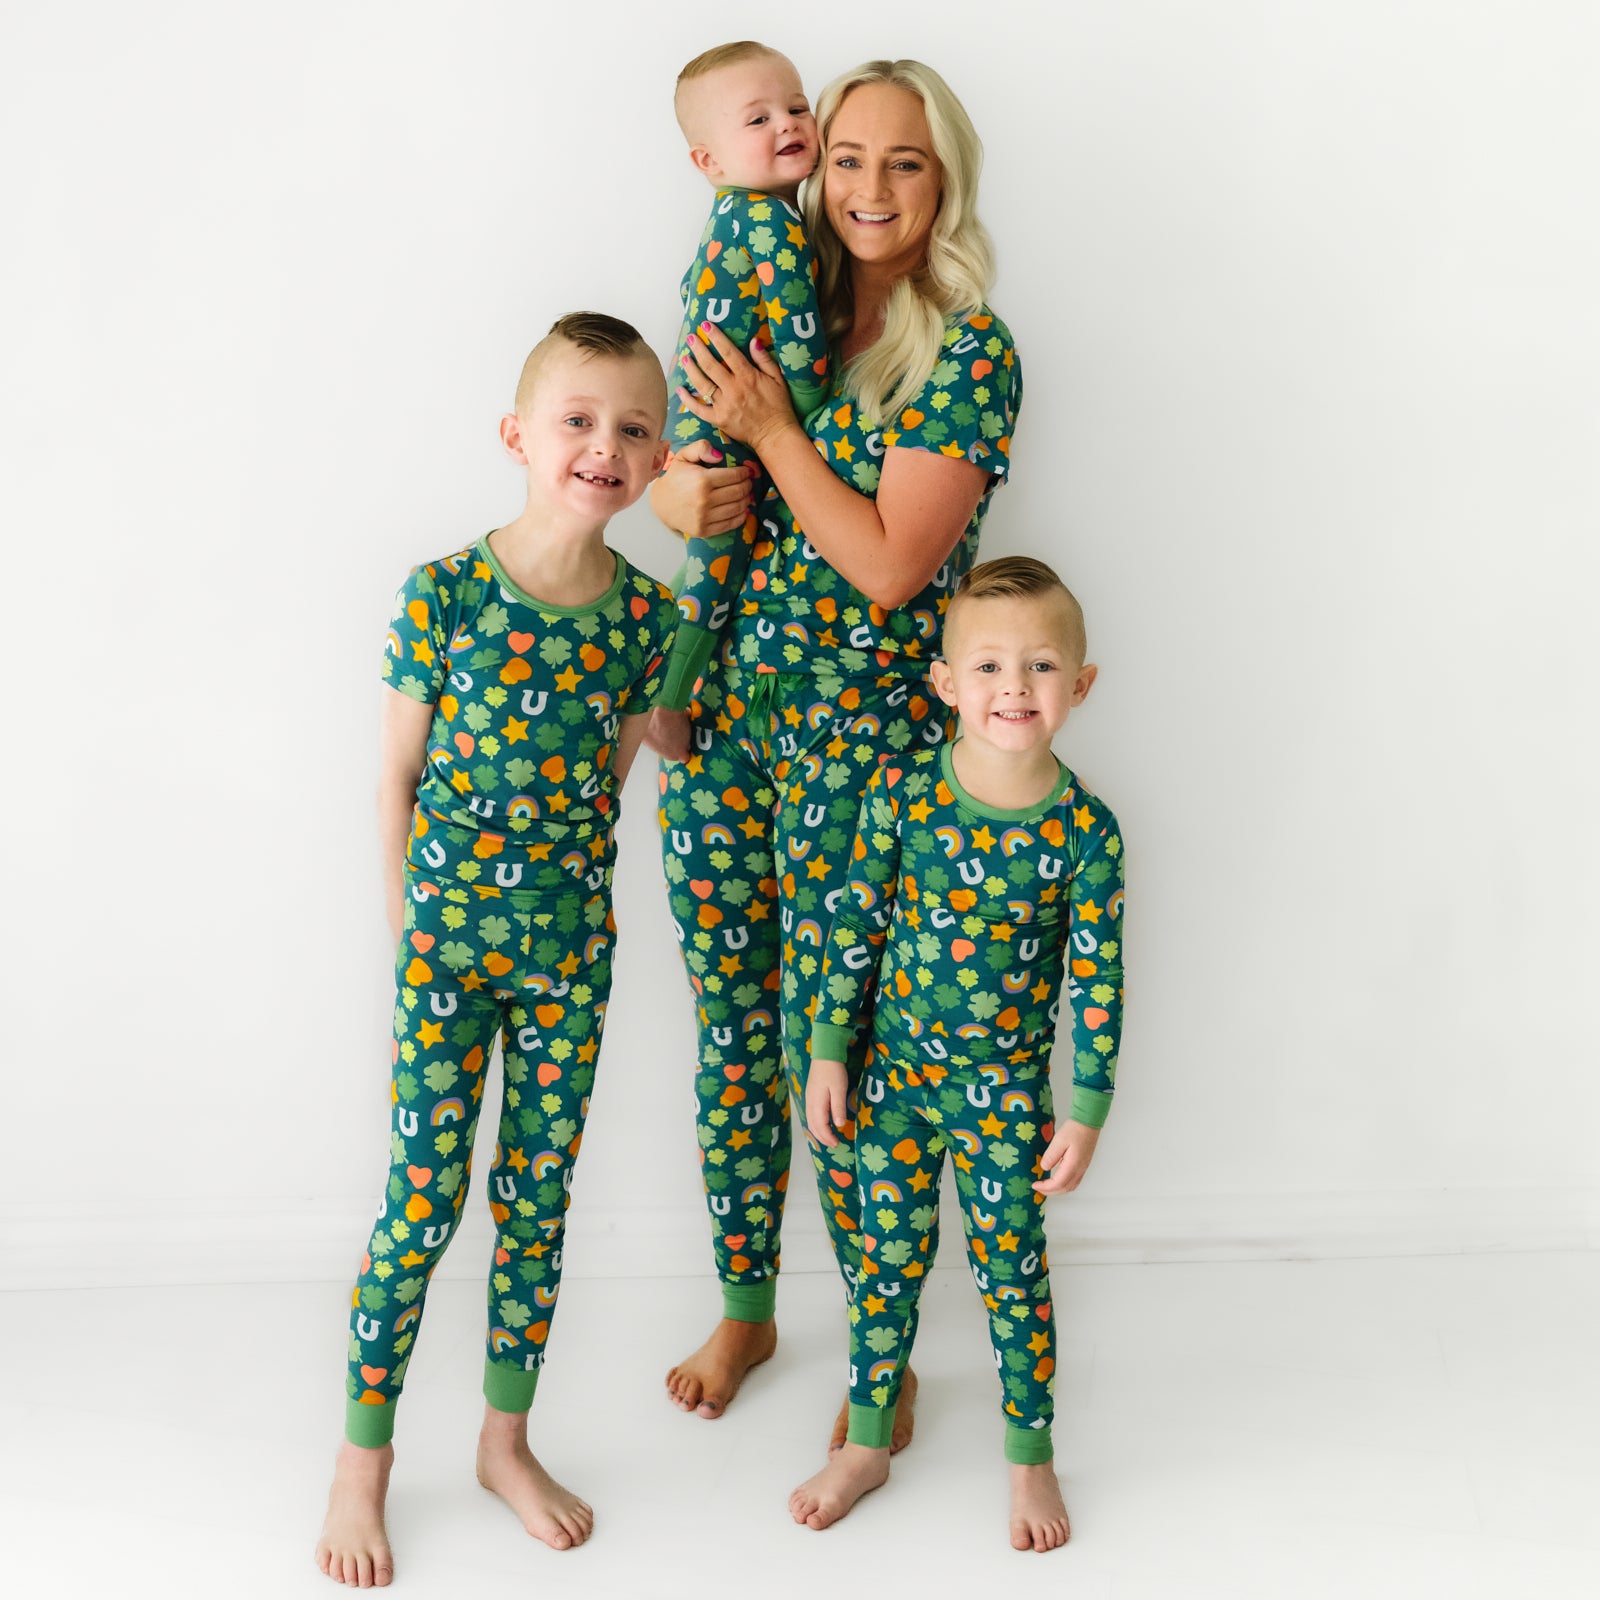 Mother and her three sons wearing matching Lucky printed pajama sets. Mom is wearing women's Lucky printed pajama top and matching pajama pants. Her children are wearing Lucky printed pajamas in short sleeve two piece, long sleeve two piece, and zippy styles.